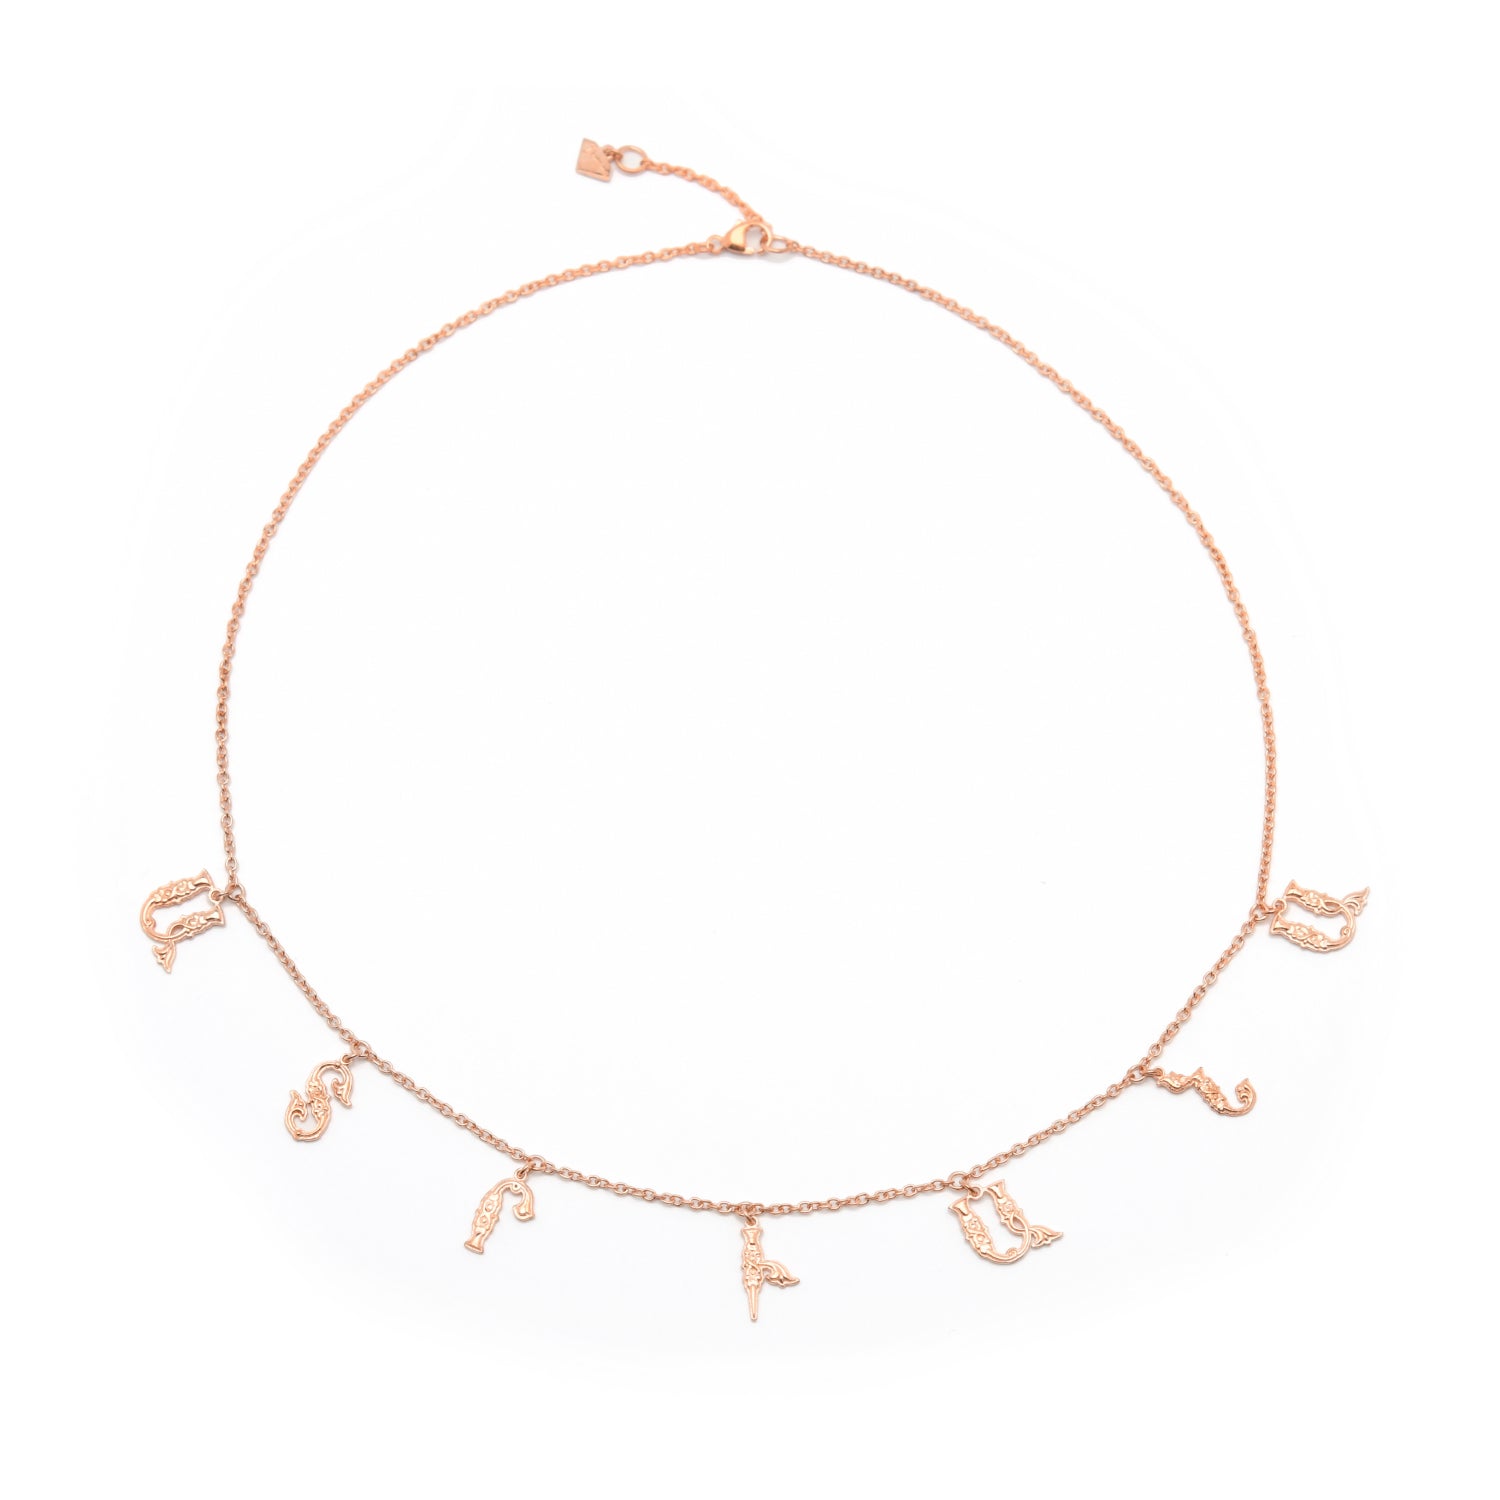 Armenian Spaced Seven-Letter Name Necklace in Rose Gold